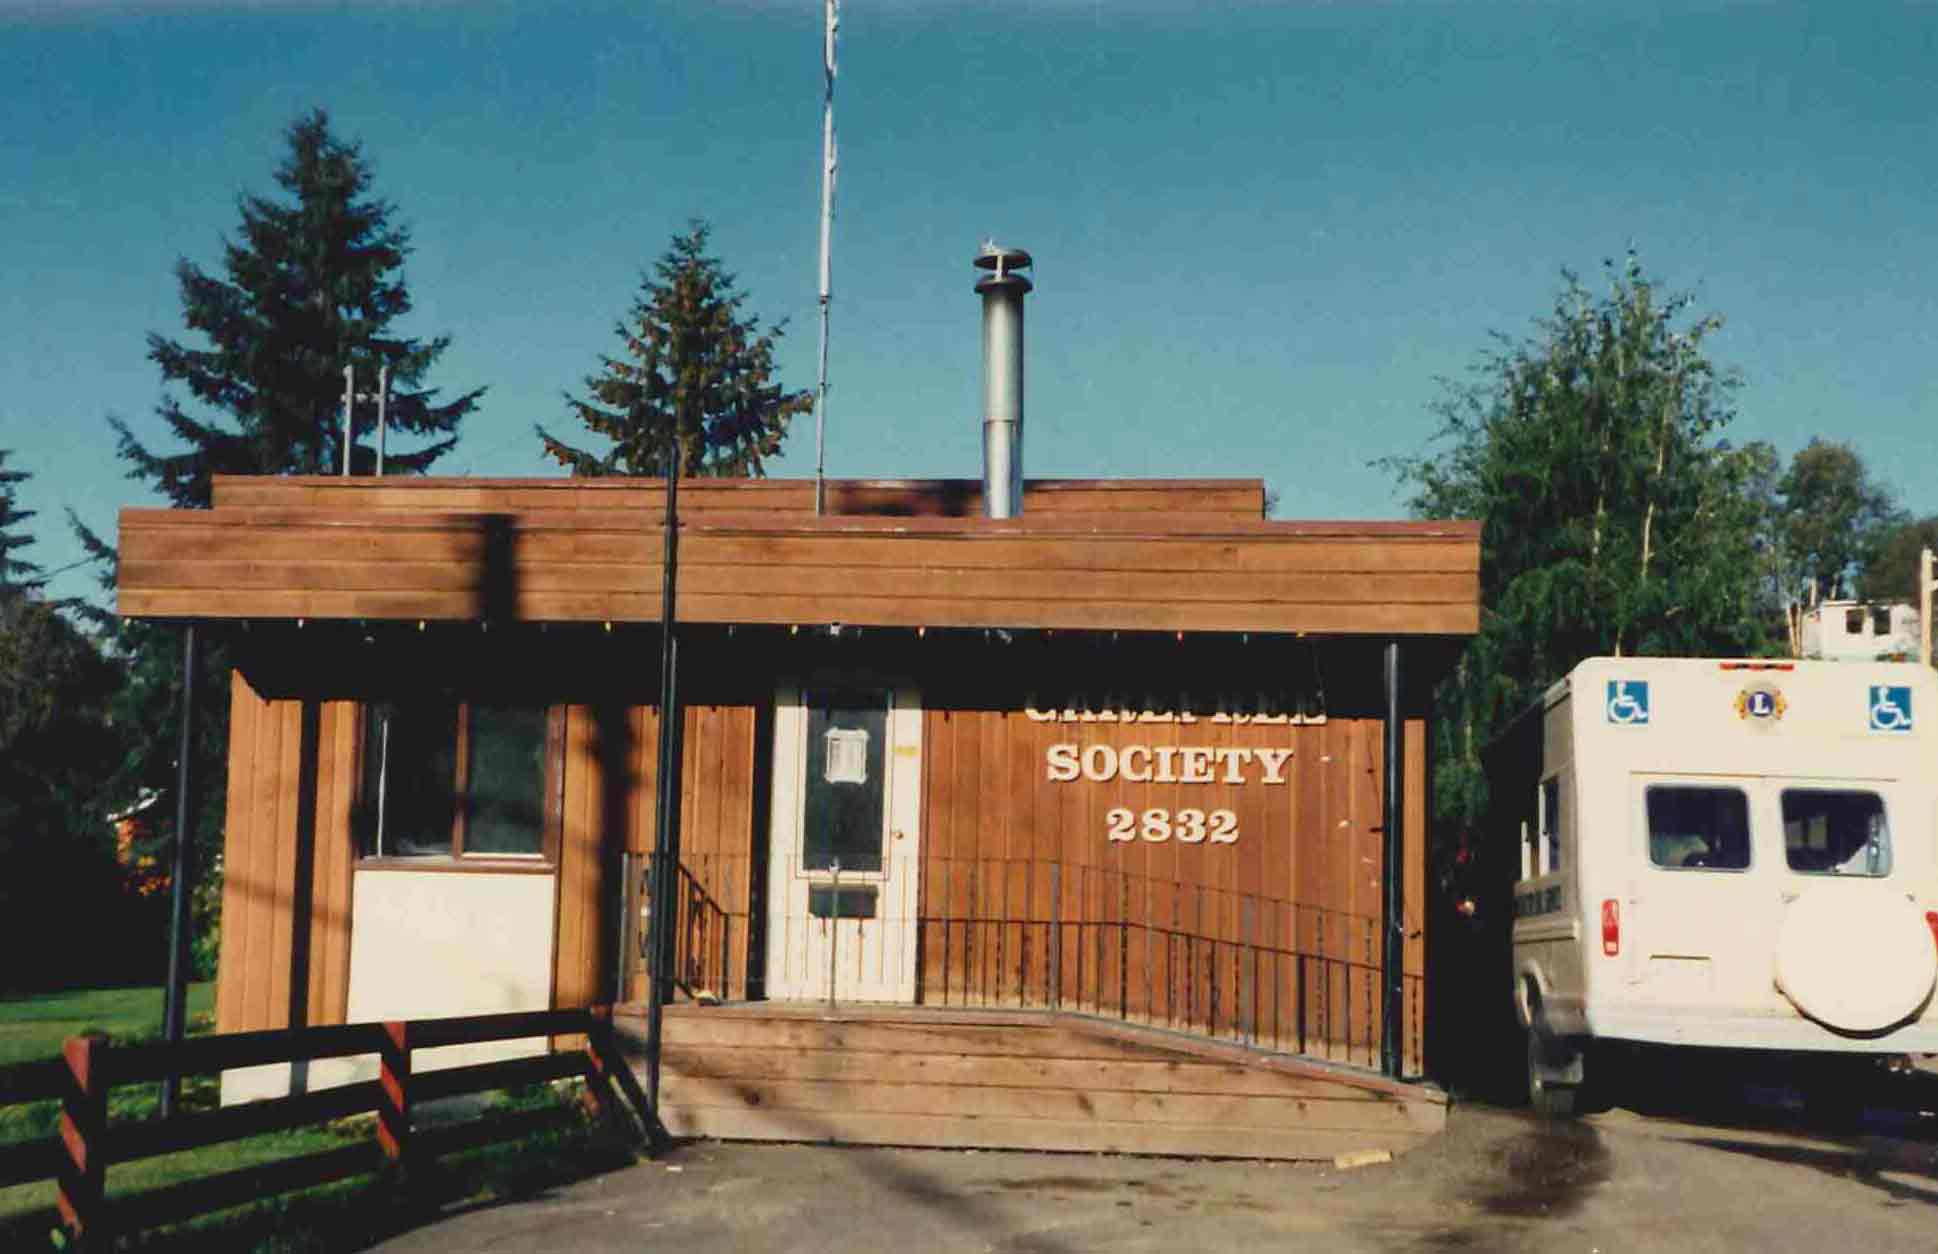 The office that began accessible transit in BC